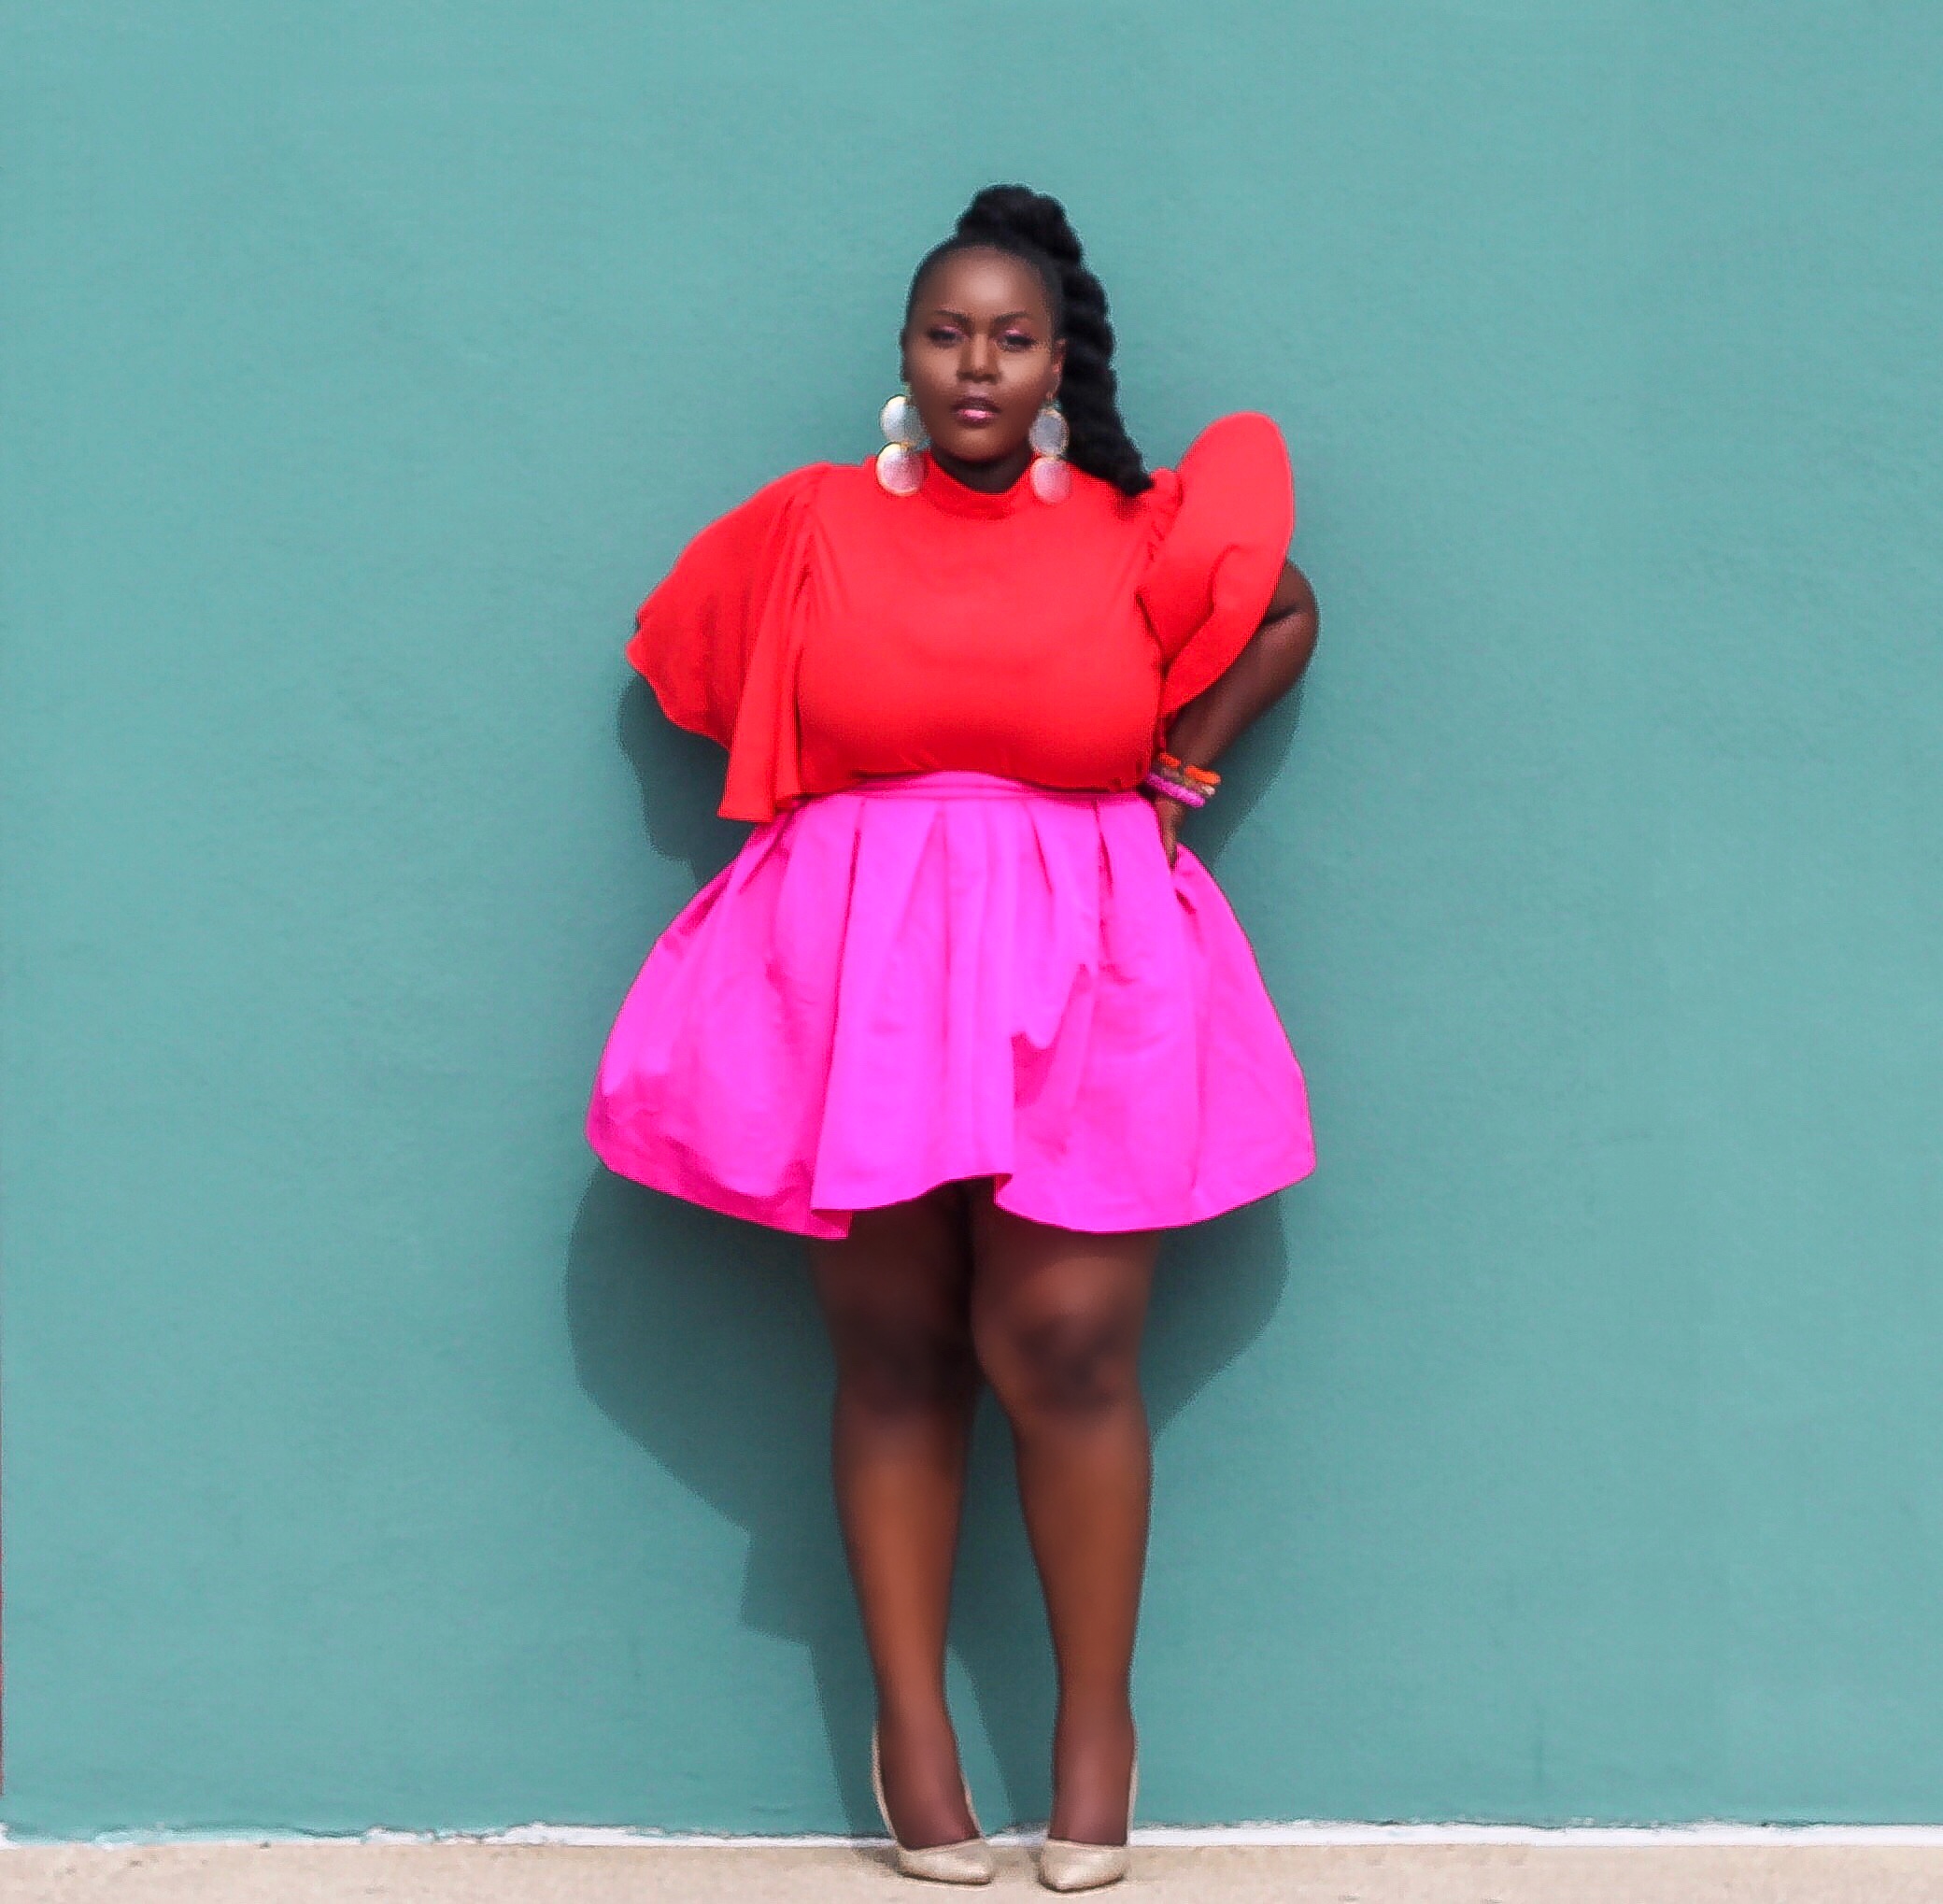 plus size fashion blogs 2017, beautiful curvy girls, how to fill the eye brow of a dark skin, beautiful plus size dark skin girls, plus size black bloggers, clothes for curvy girls, curvy girl fashion clothing, plus blog, plus size fashion tips, plus size women blog, curvy women fashion, plus blog, curvy girl fashion blog, style plus curves, plus size fashion instagram, curvy girl blog, bbw blog, plus size street fashion, plus size beauty blog, plus size fashion ideas, curvy girl summer outfits, plus size fashion magazine, plus fashion bloggers, zara, Rosie the riveter shirt; Emilia embroidered beaded clutch; Vince Camuto heels; Lula shell drop earrings; Aldo Galigossi sunnies